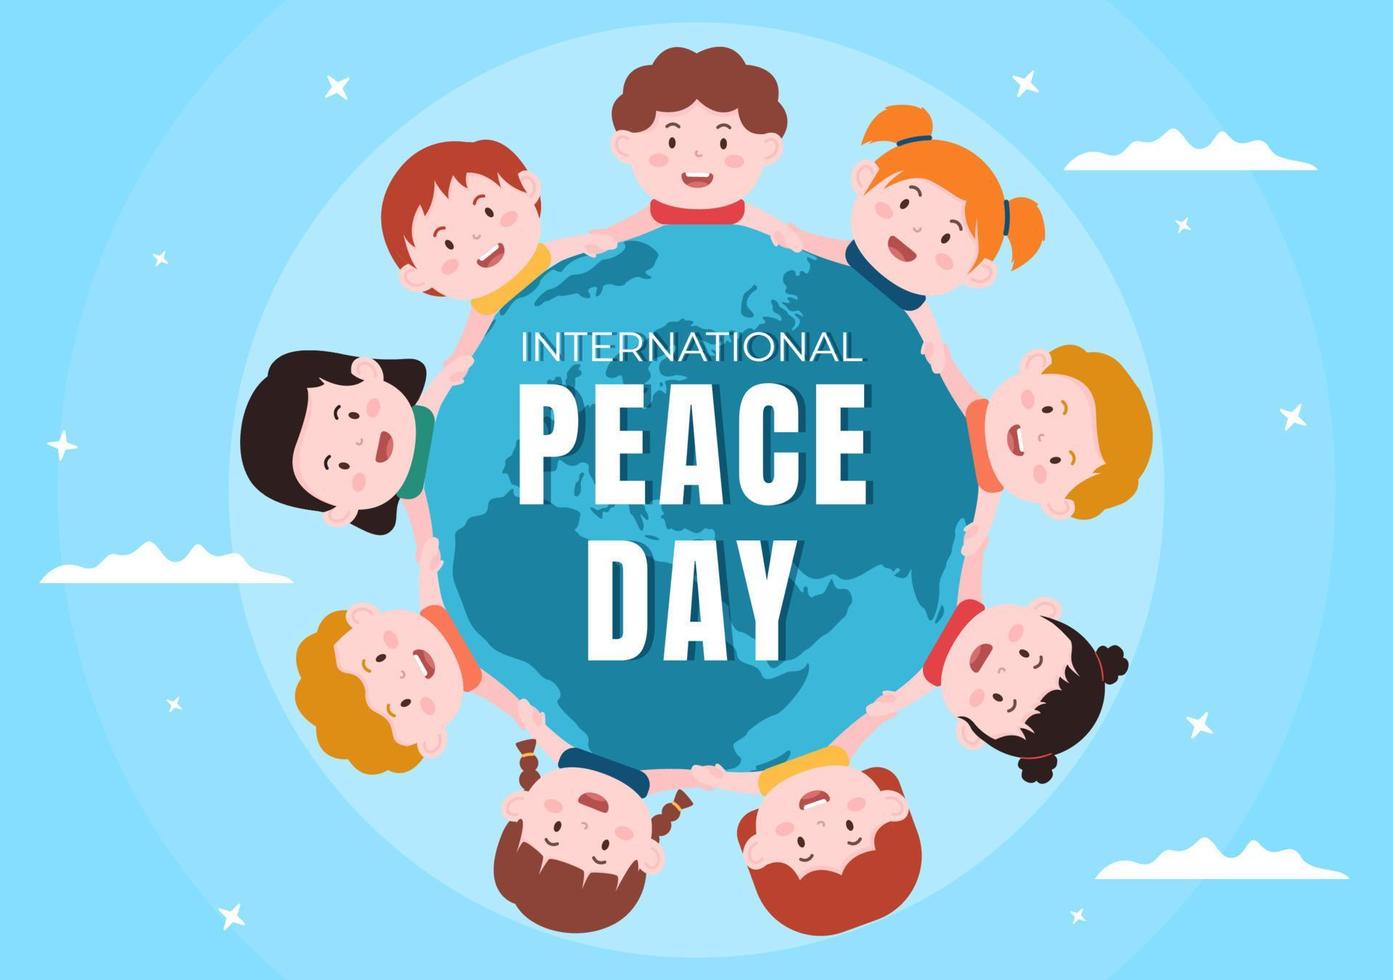 International Peace Day Cartoon Illustration with Hands, Cute Children, Globe and Blue Sky to Create Prosperous in the World in Flat Style Design vector